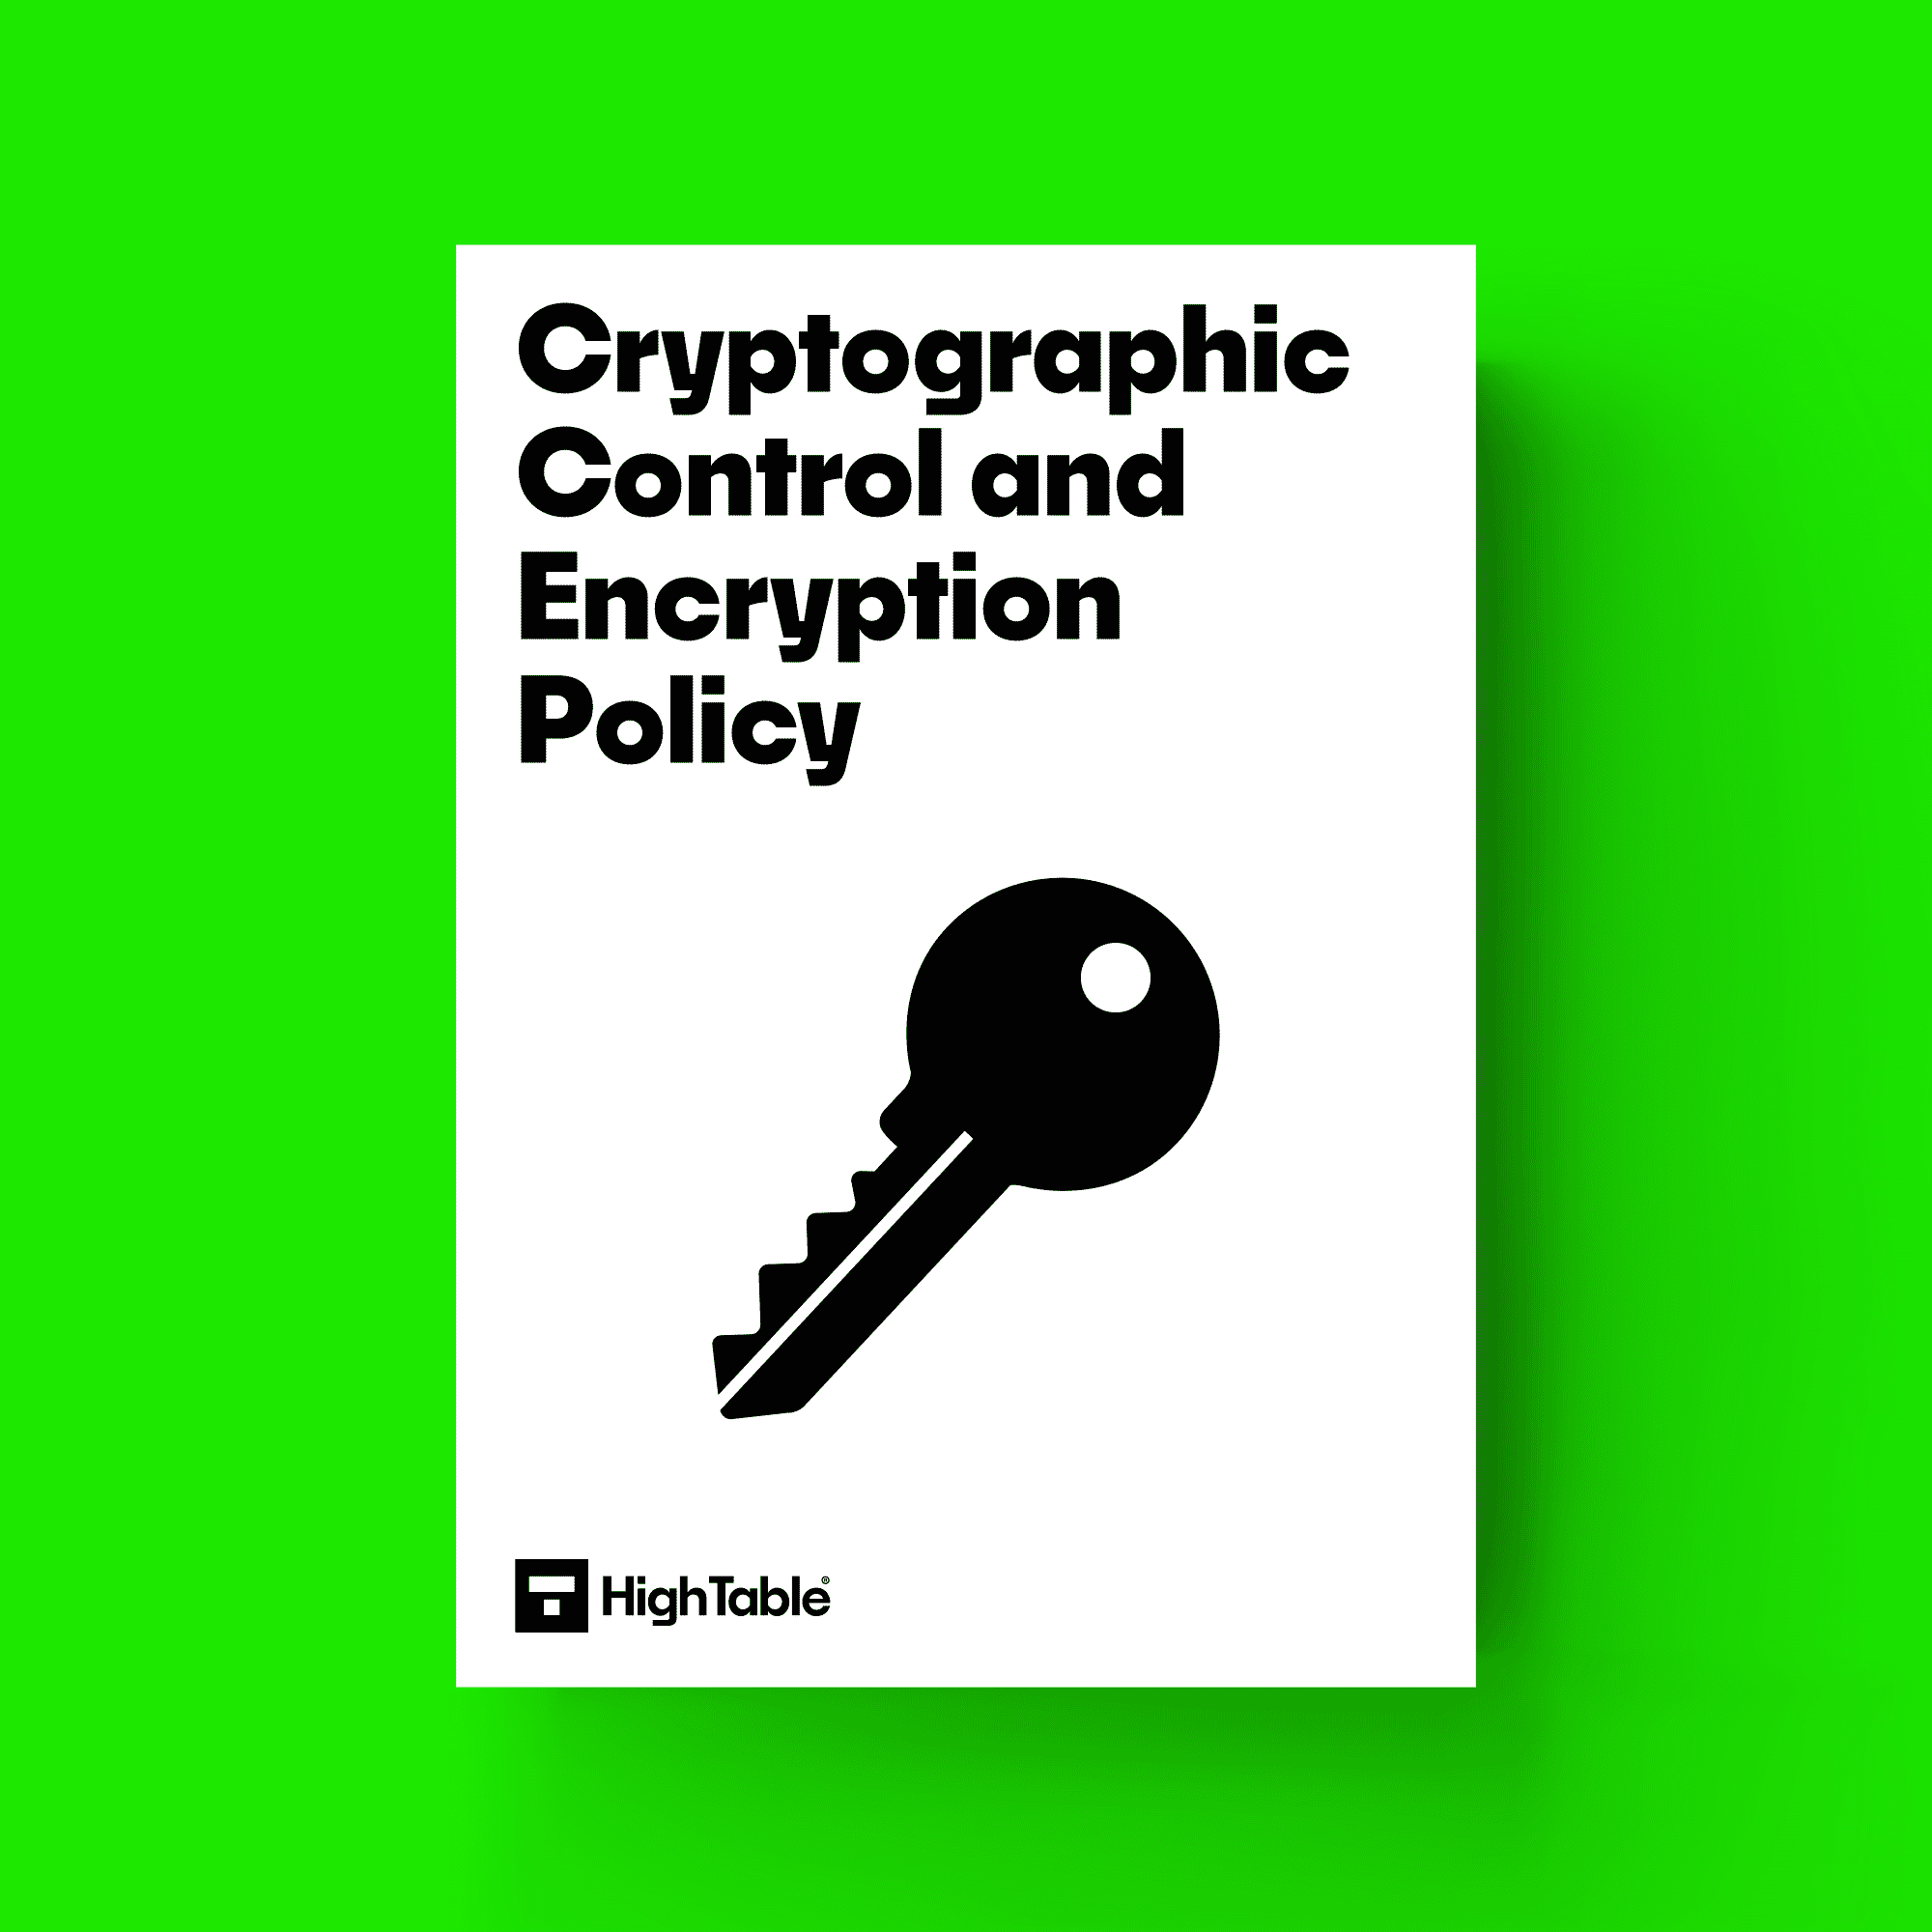 ISO 27001 Cryptographic Control and Encryption Policy Template